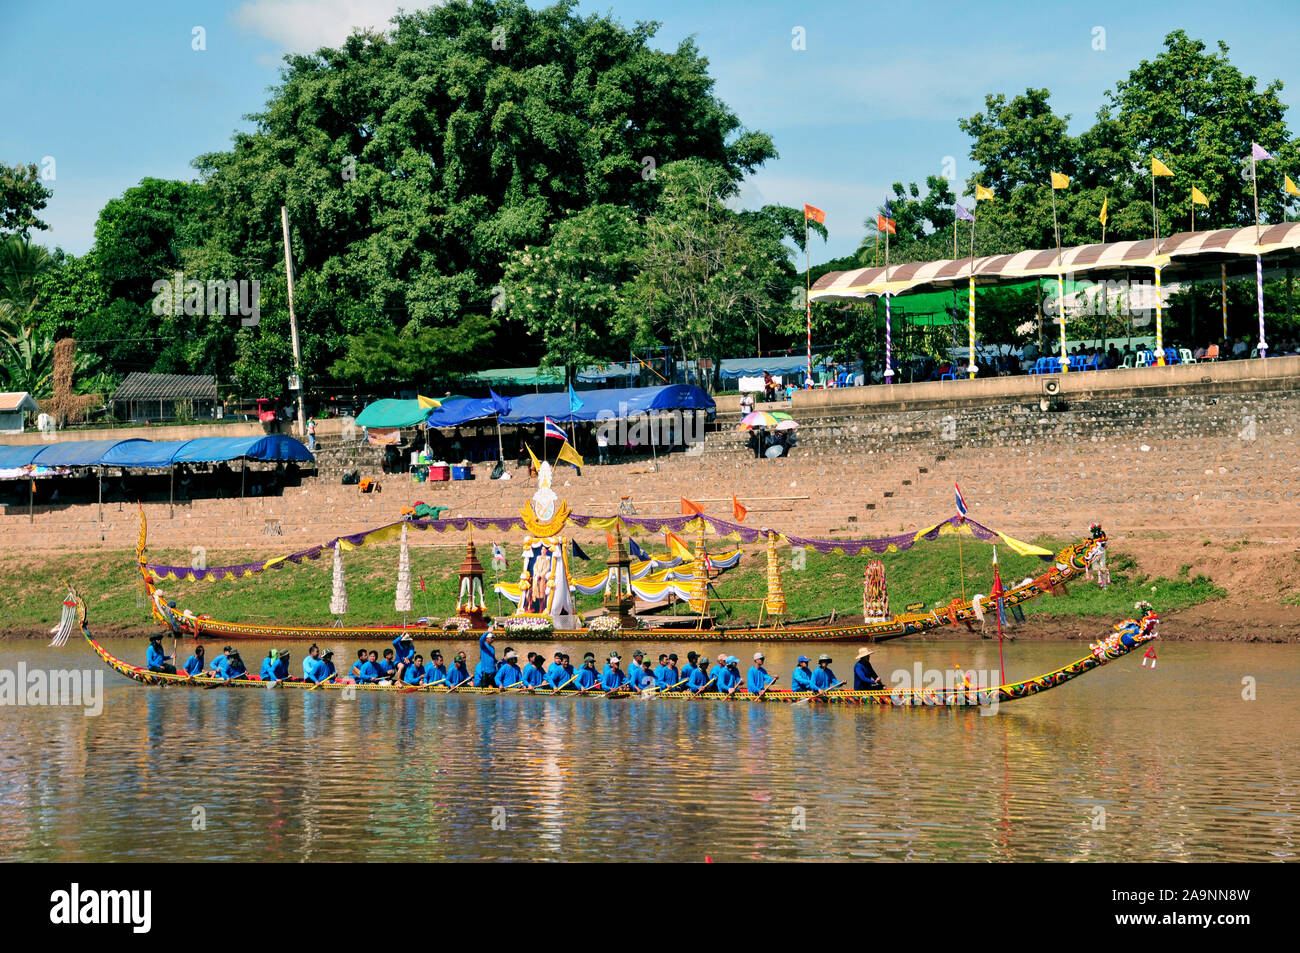 Nan, Thailand – October 27,2019 : King of Naga long boat racing festival, the long boats used during the Nan River races at the end of Buddhist Lent O Stock Photo